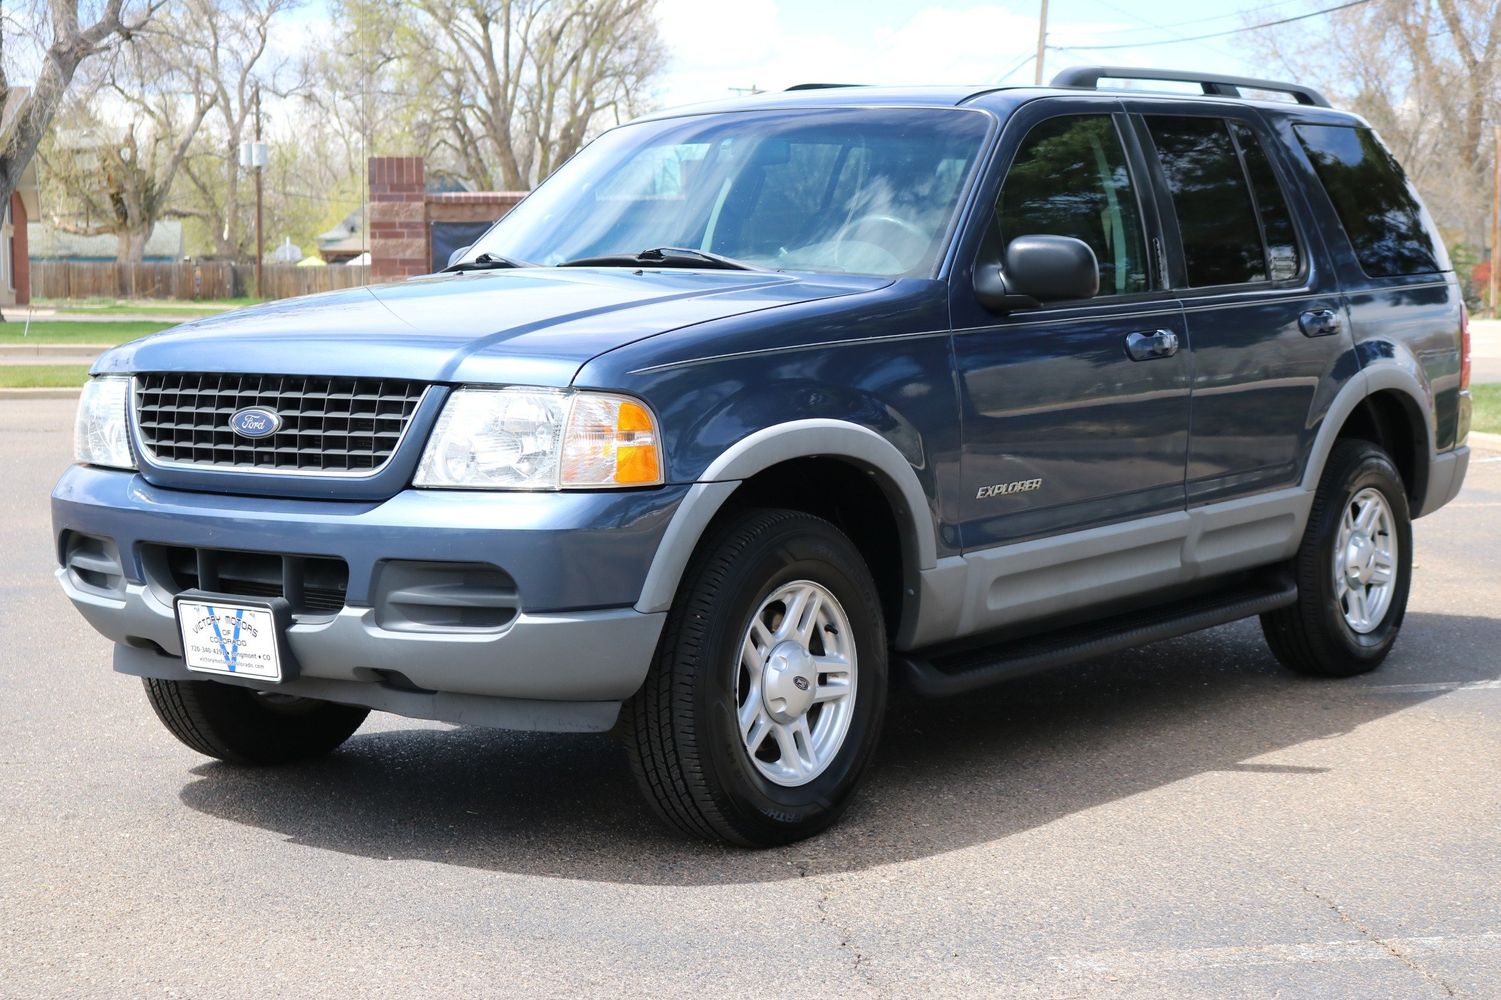 2002 Ford Explorer XLT | Victory Motors of Colorado 2002 Ford Explorer 4.0 Towing Capacity